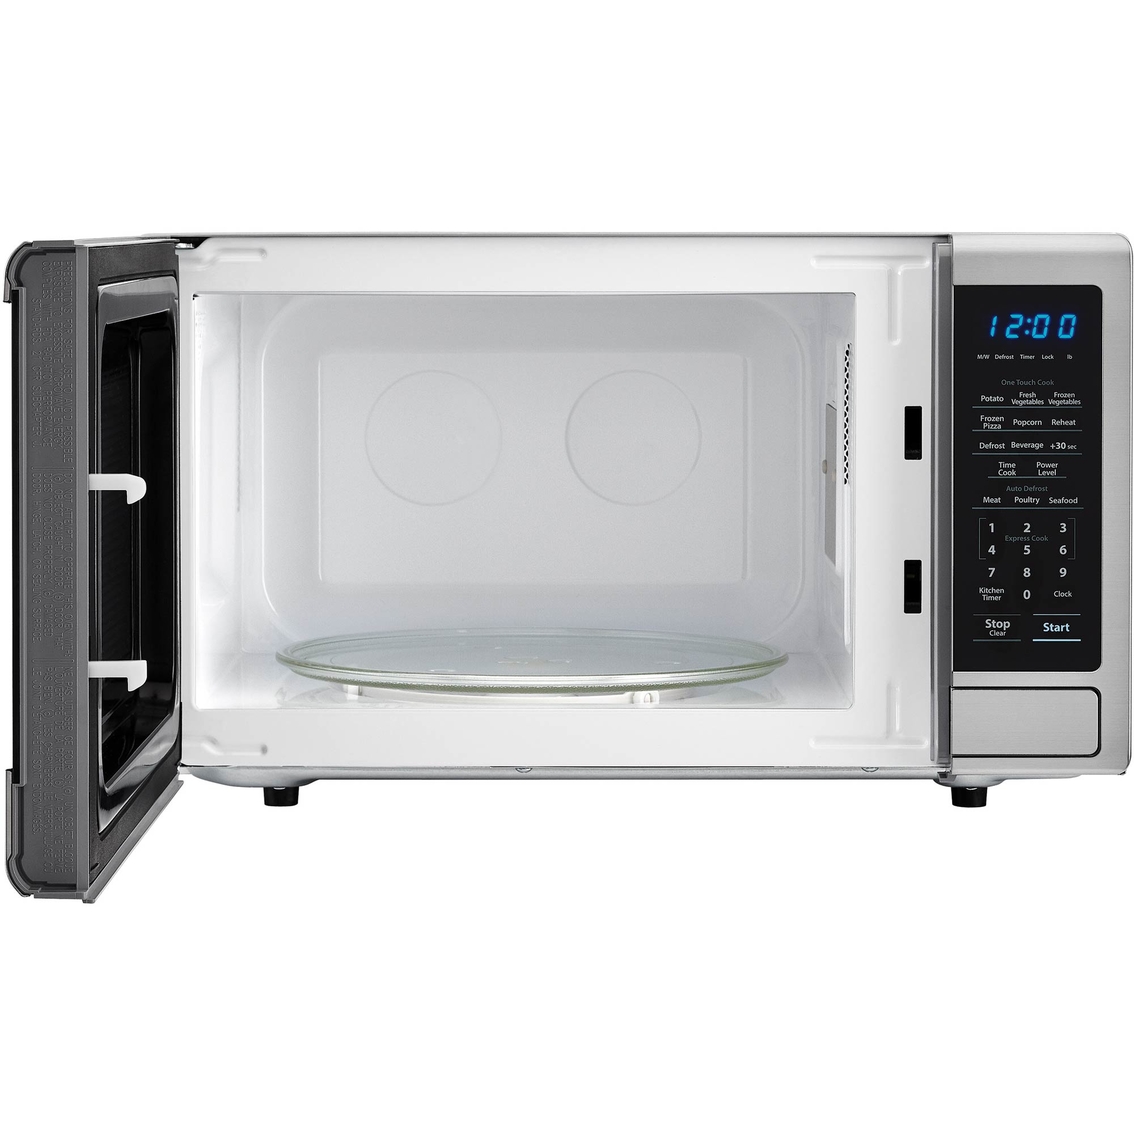 Sharp 1.1 Cu. Ft. Orville Redenbacher Certified Microwave Oven - Image 3 of 4